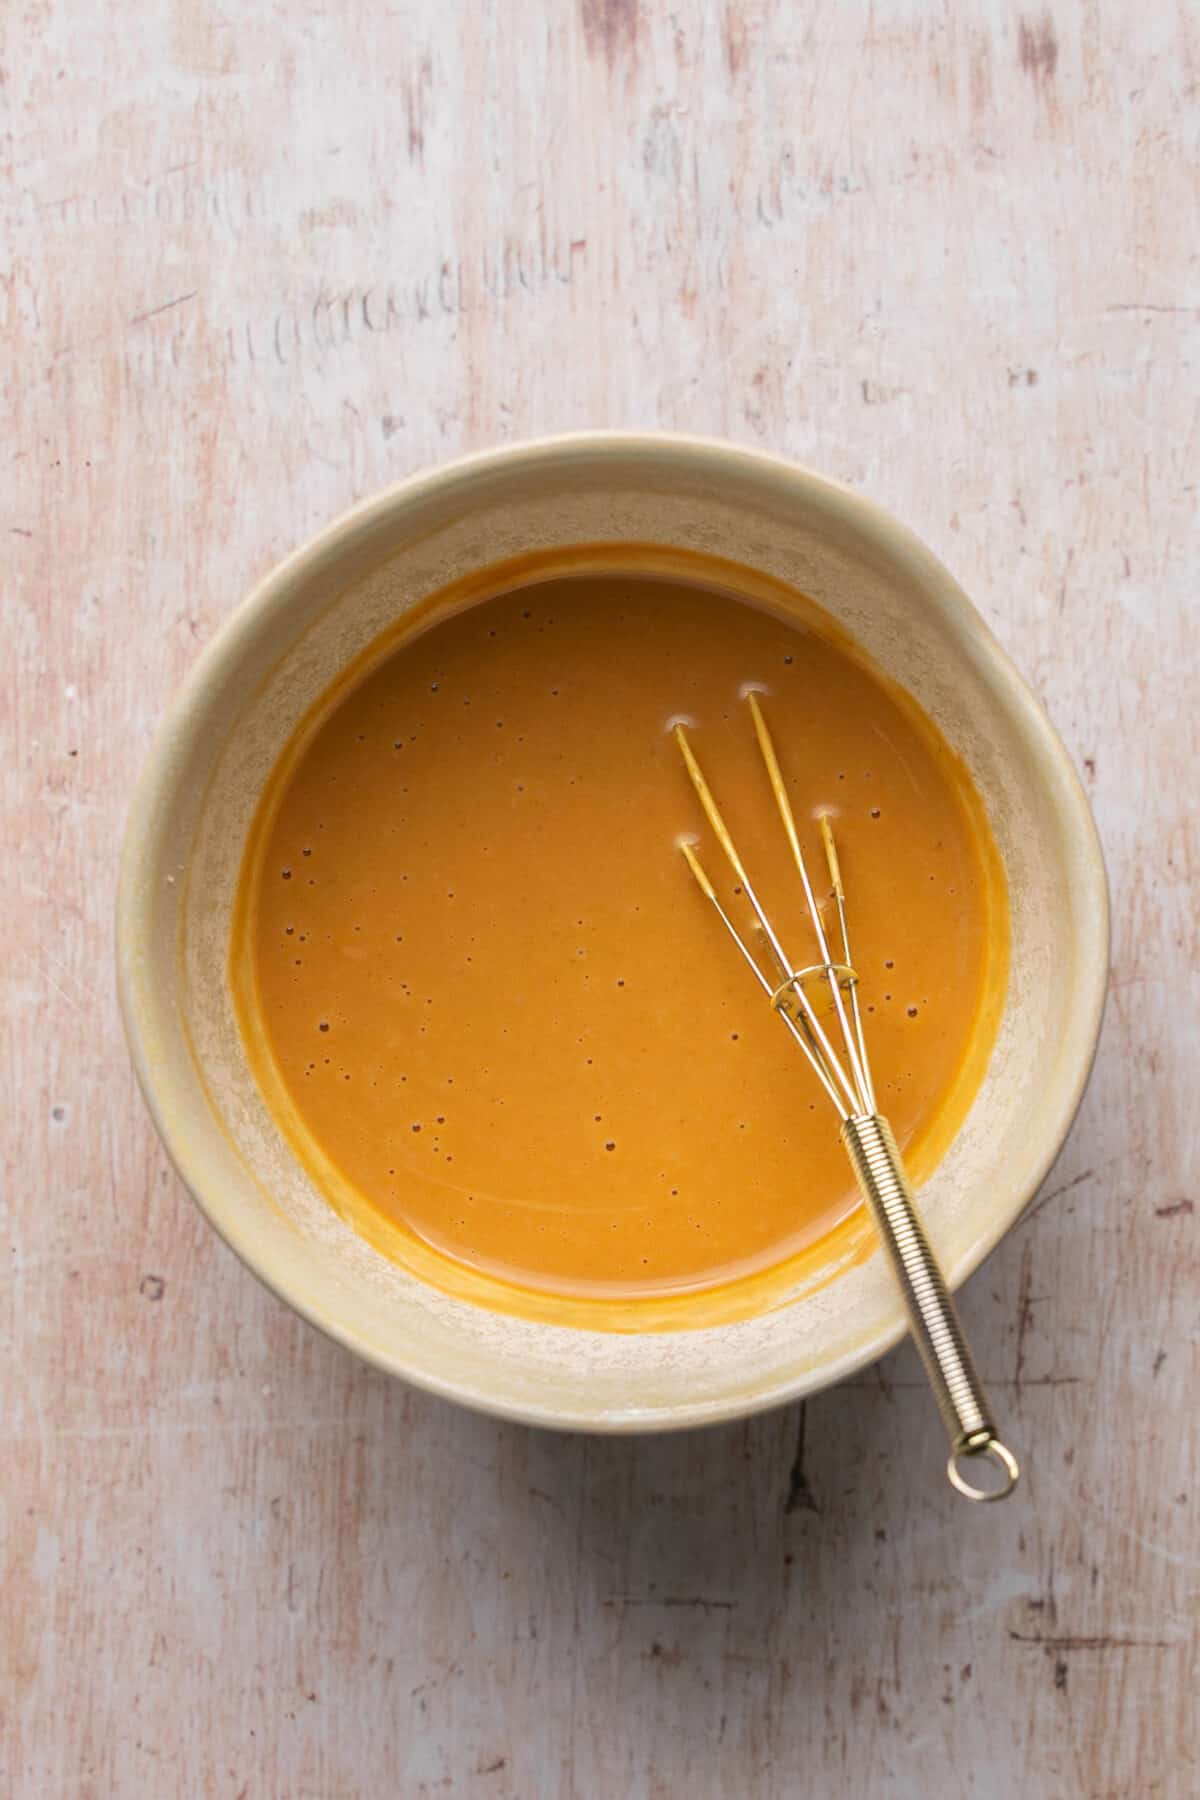 Peanut butter sauce in a small bowl.